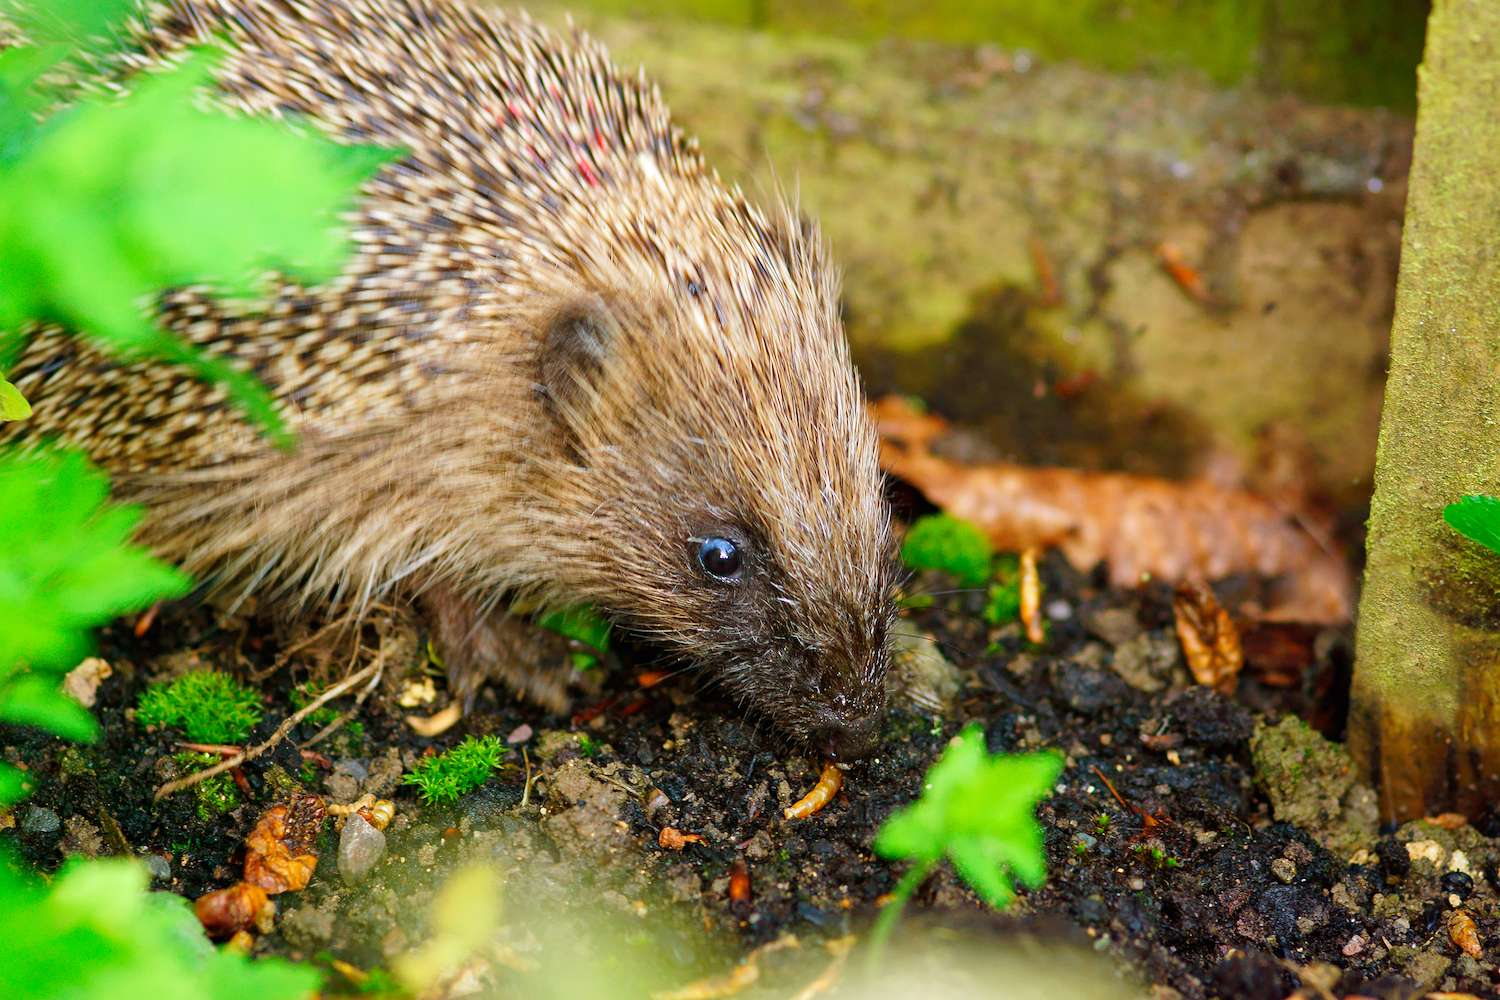 A partially hidden view of a European Hedgehog, selective focus, in an urban garden eating meal worms hiding in the foliage in Spring, The Cotswolds, Gloucestershire, UK